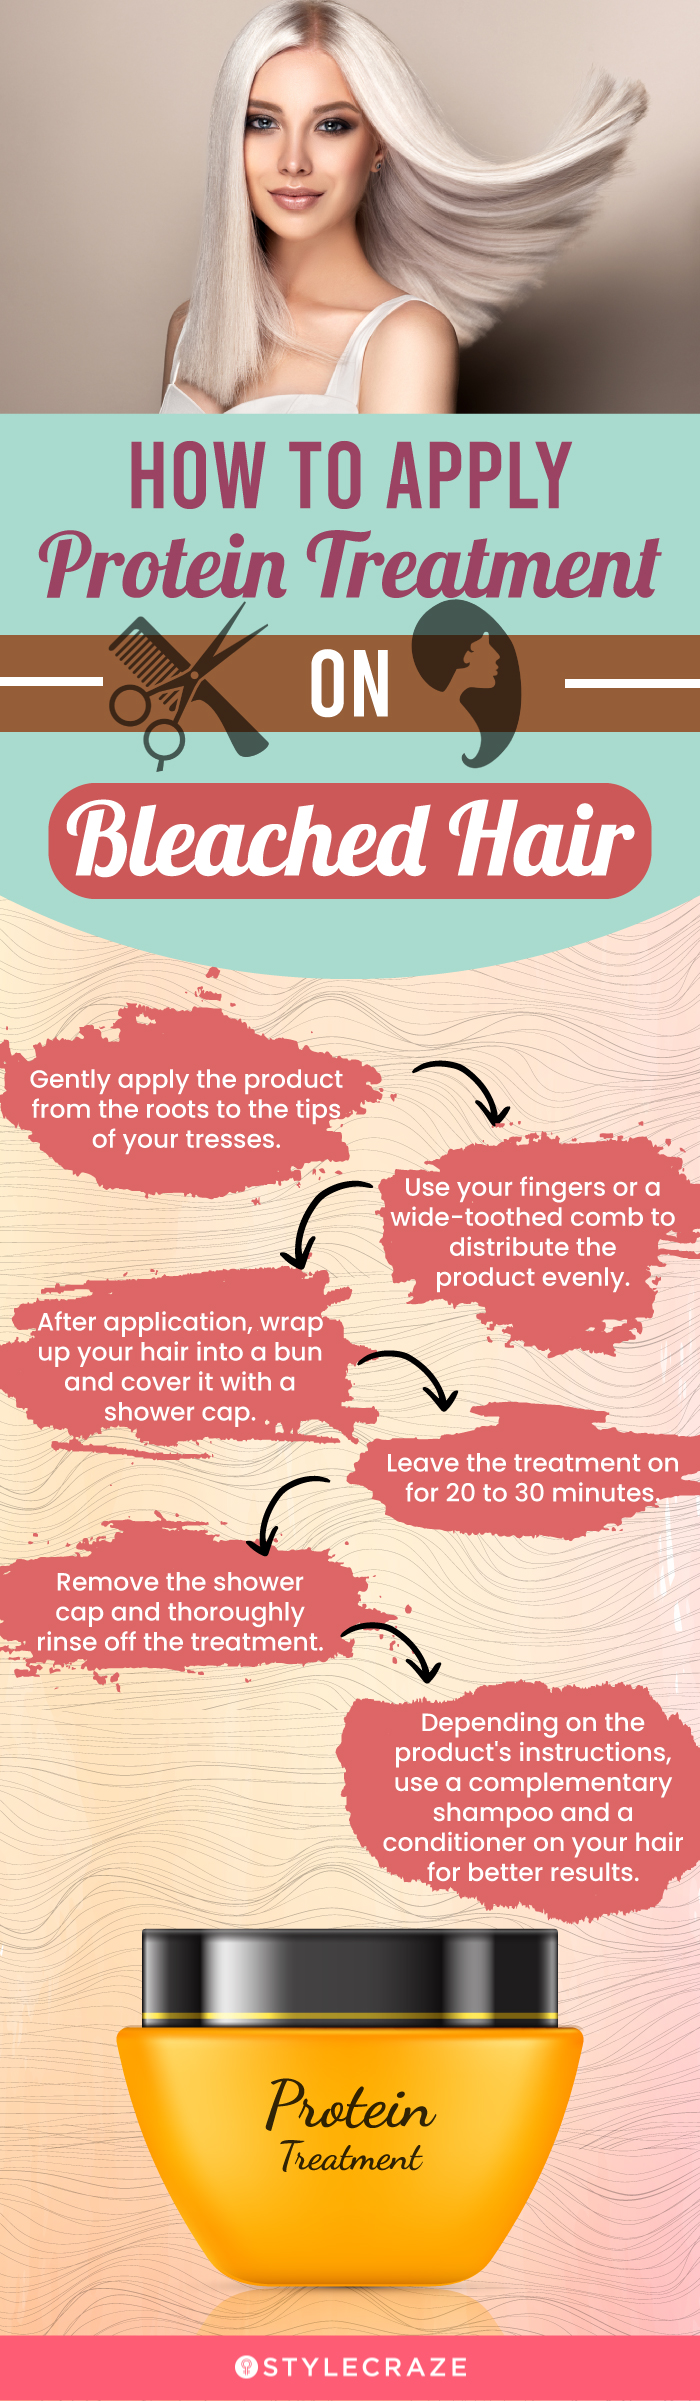 How To Apply Protein Treatment On Bleached Hair (infographic)